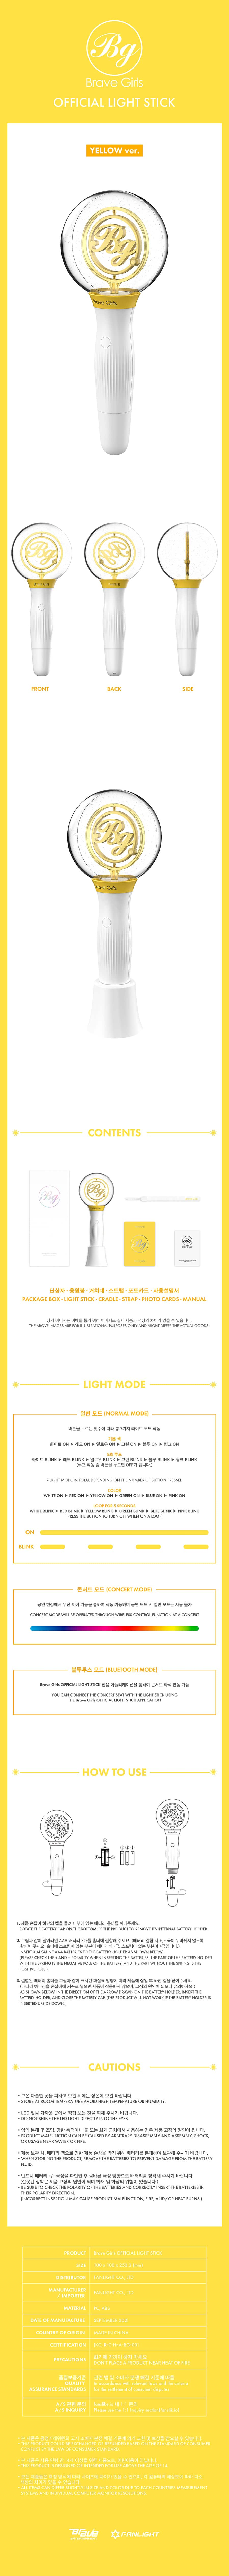 brave-girls-official-light-stick-yellow-wholesales